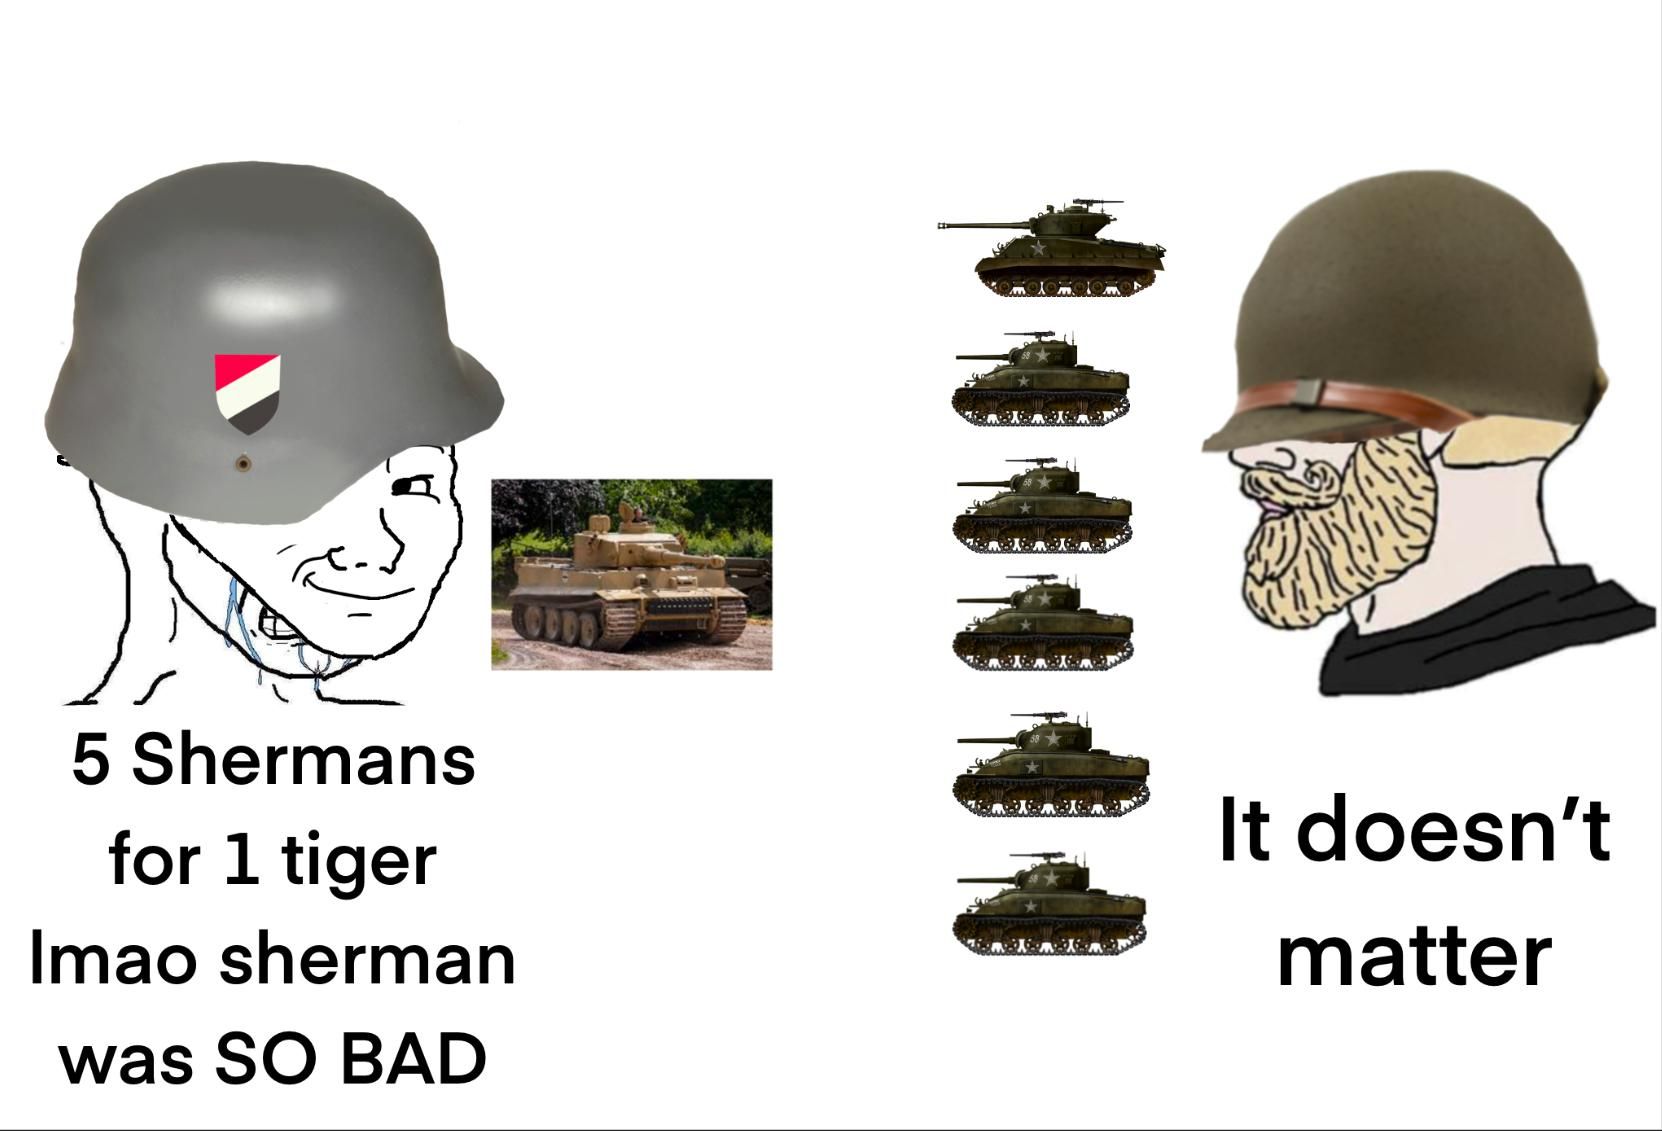 I am not saying that the sherman was a bad tank